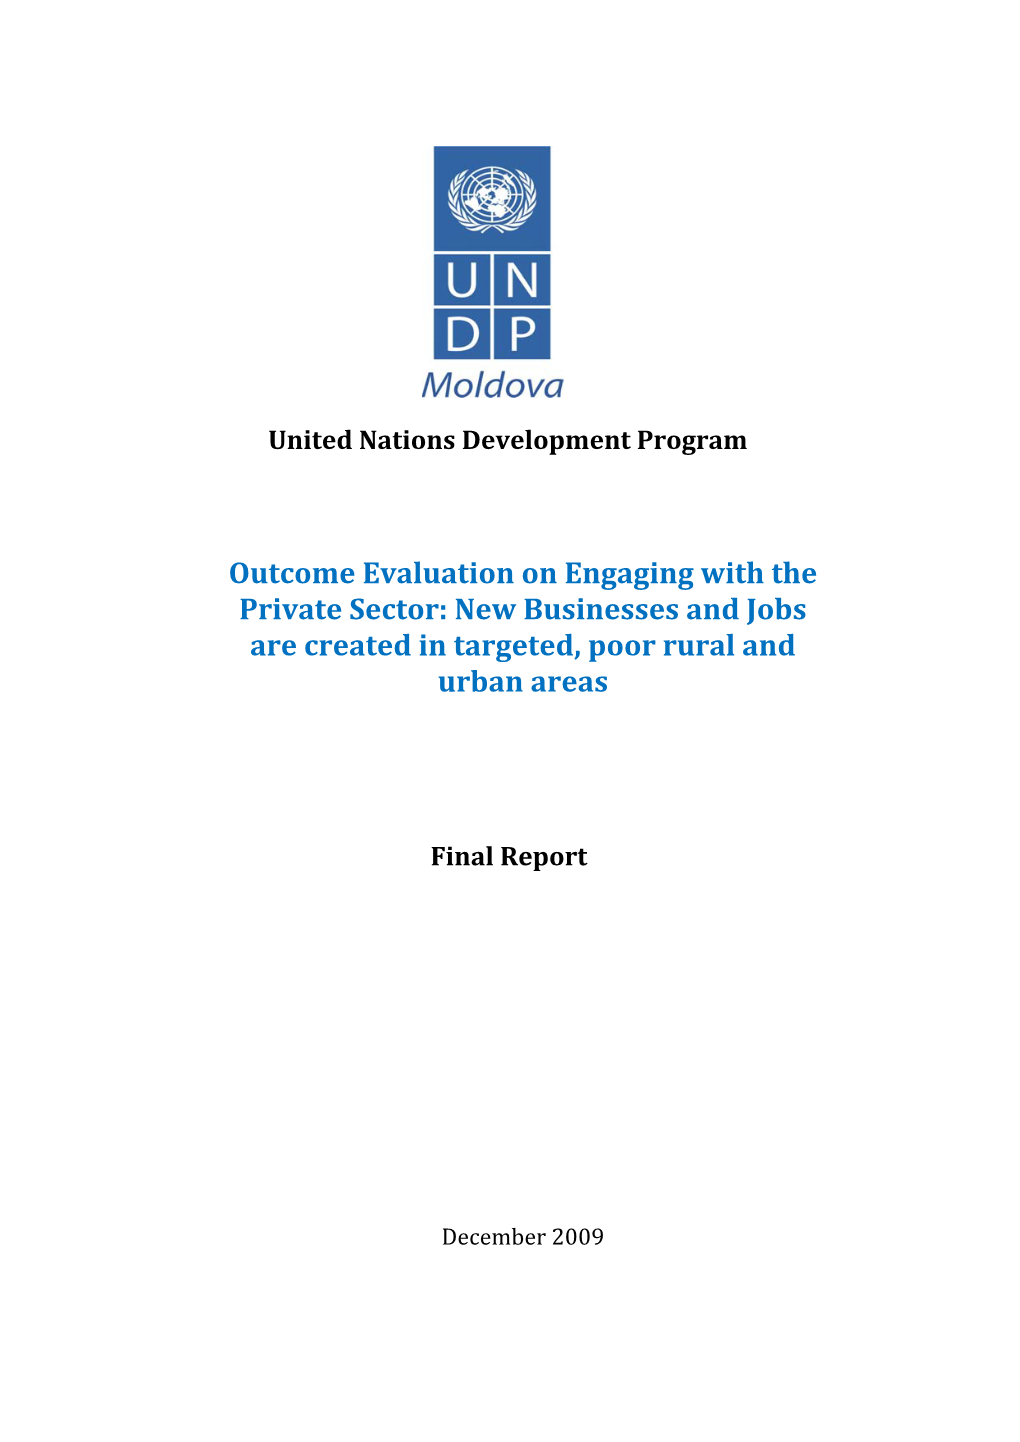 Final Evaluation Report Will Be Placed on the UNDP Web-Site and Distributed Through Regular Government Channels to Interested Parties